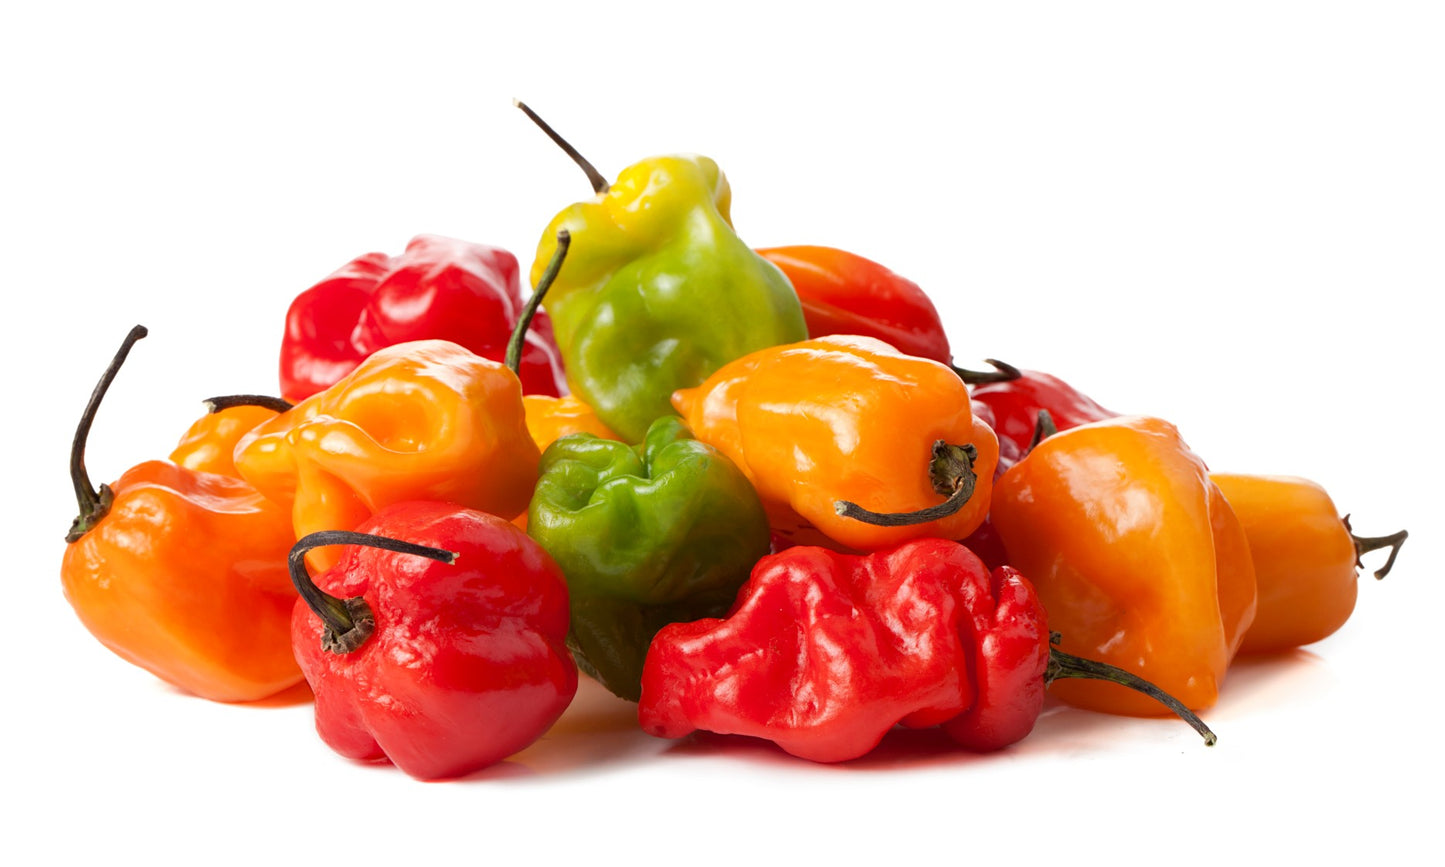 Hot/Haberno Peppers